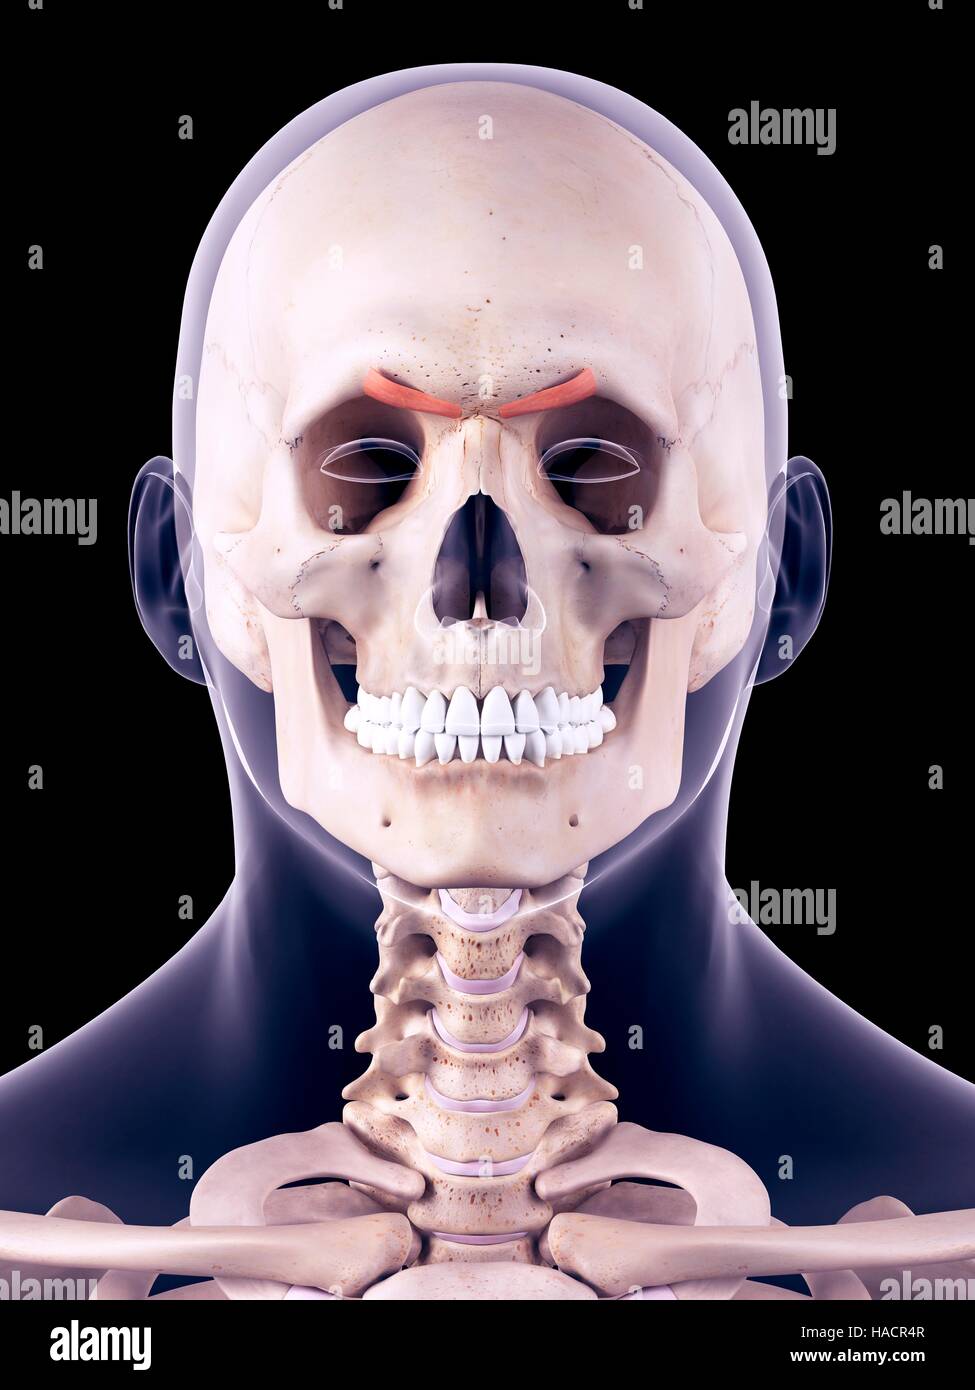 Medical accurate illustration of the corrugator supercilii muscles. Stock Photo